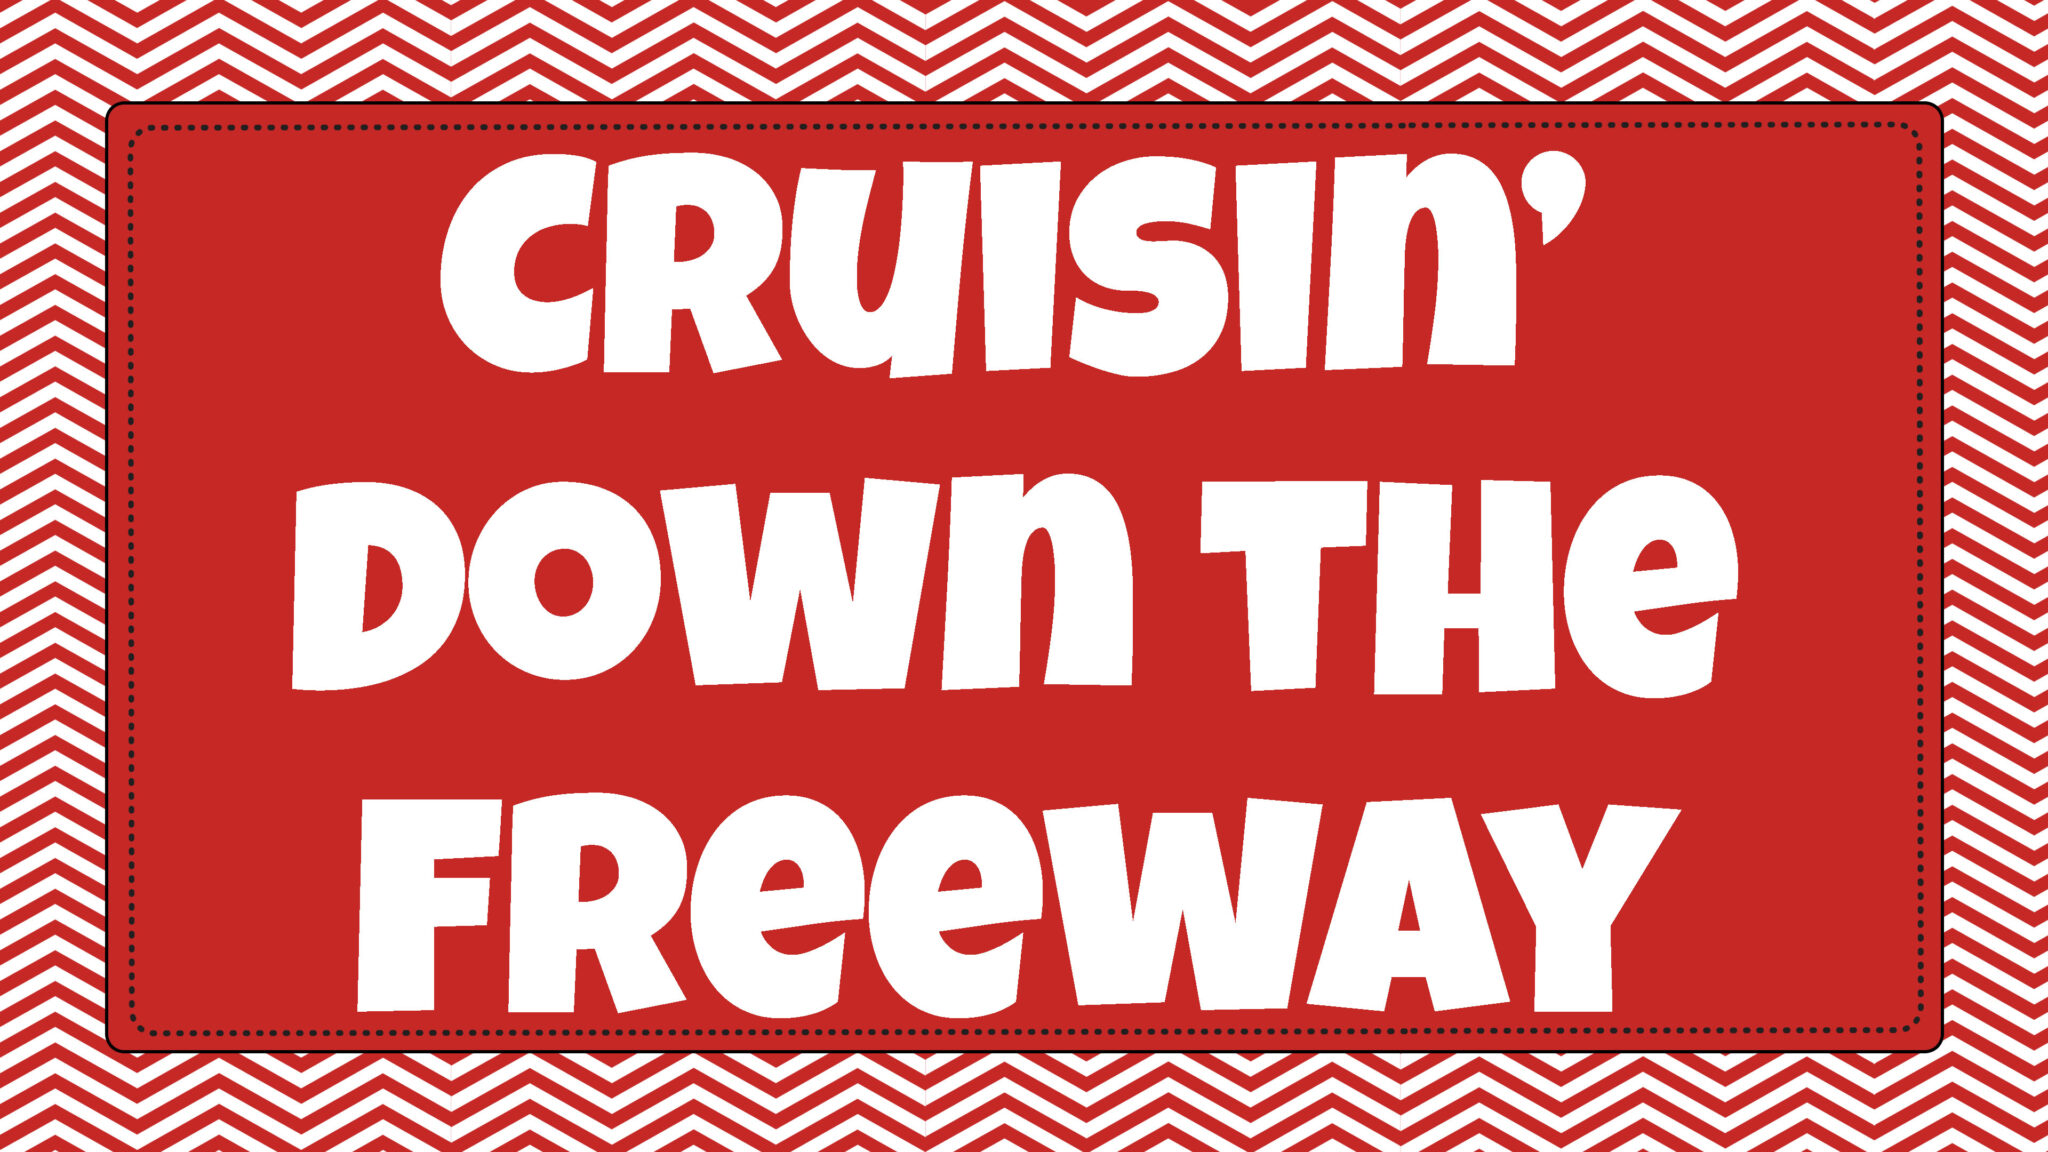 Kids Song Cruisin' Down the Freeway Video Thumbnail for the lyric song video